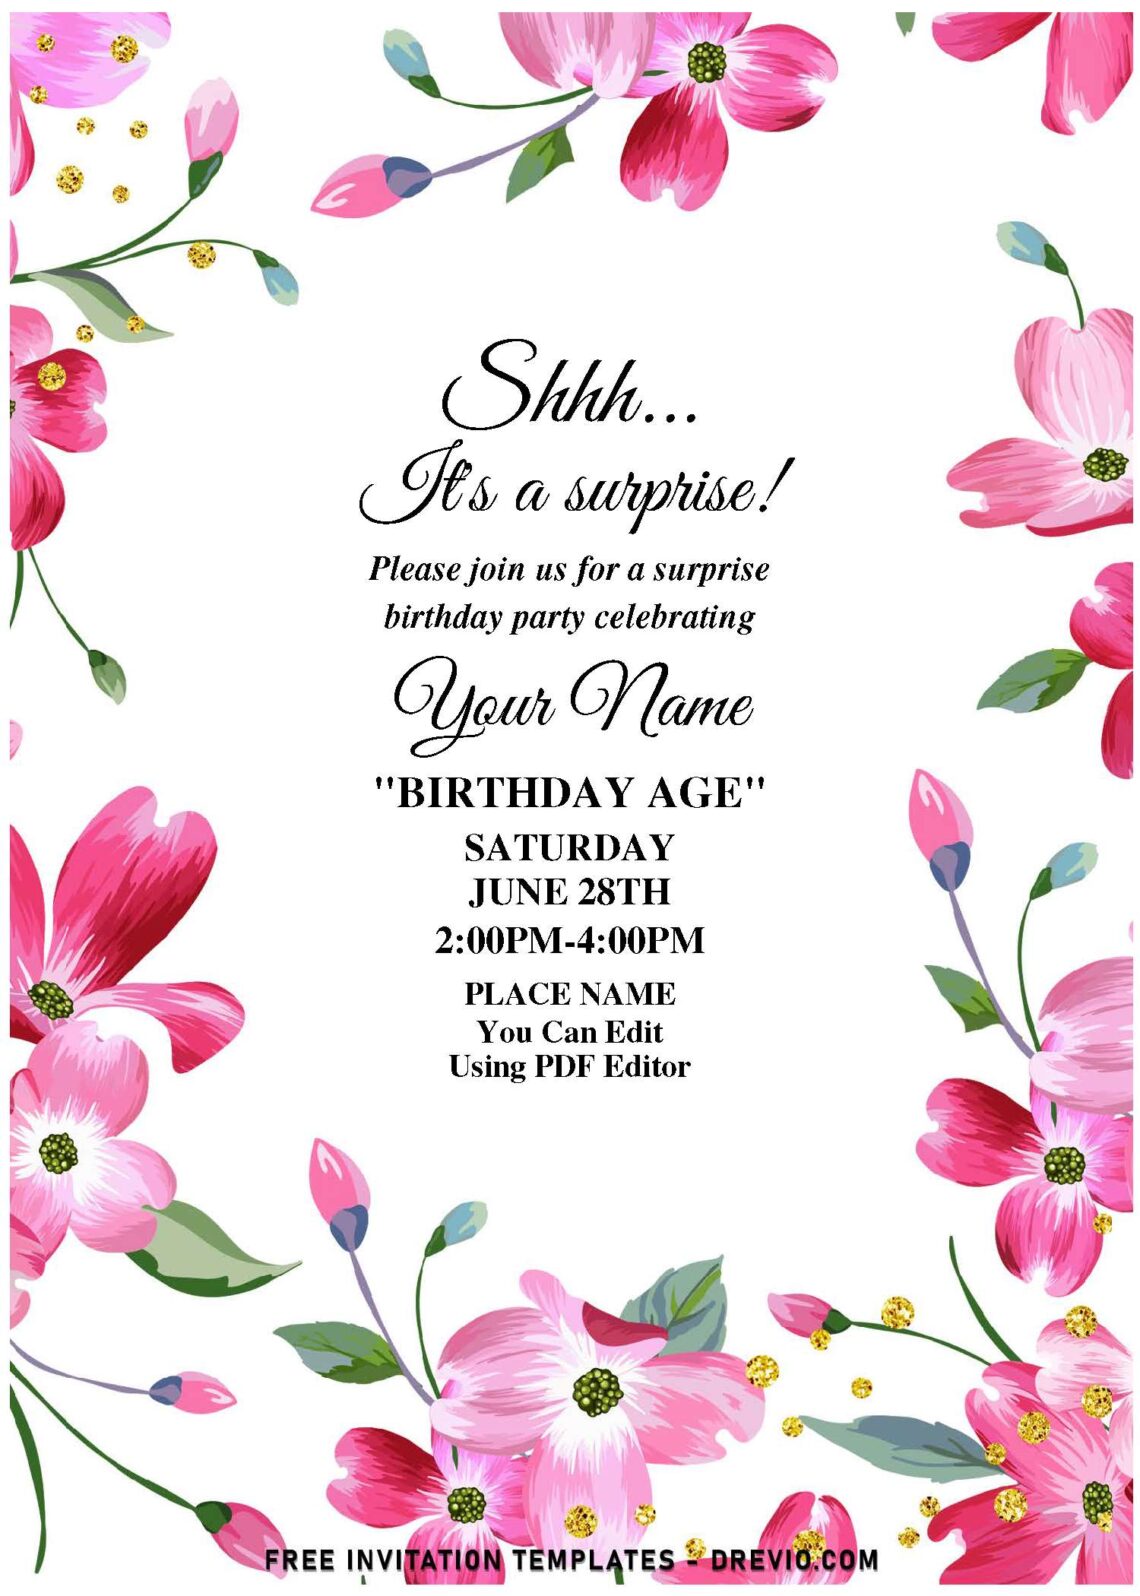 (Free Editable PDF) Whimsical Spring In Pink Dogwood Birthday Invitation Templates with pristine white background